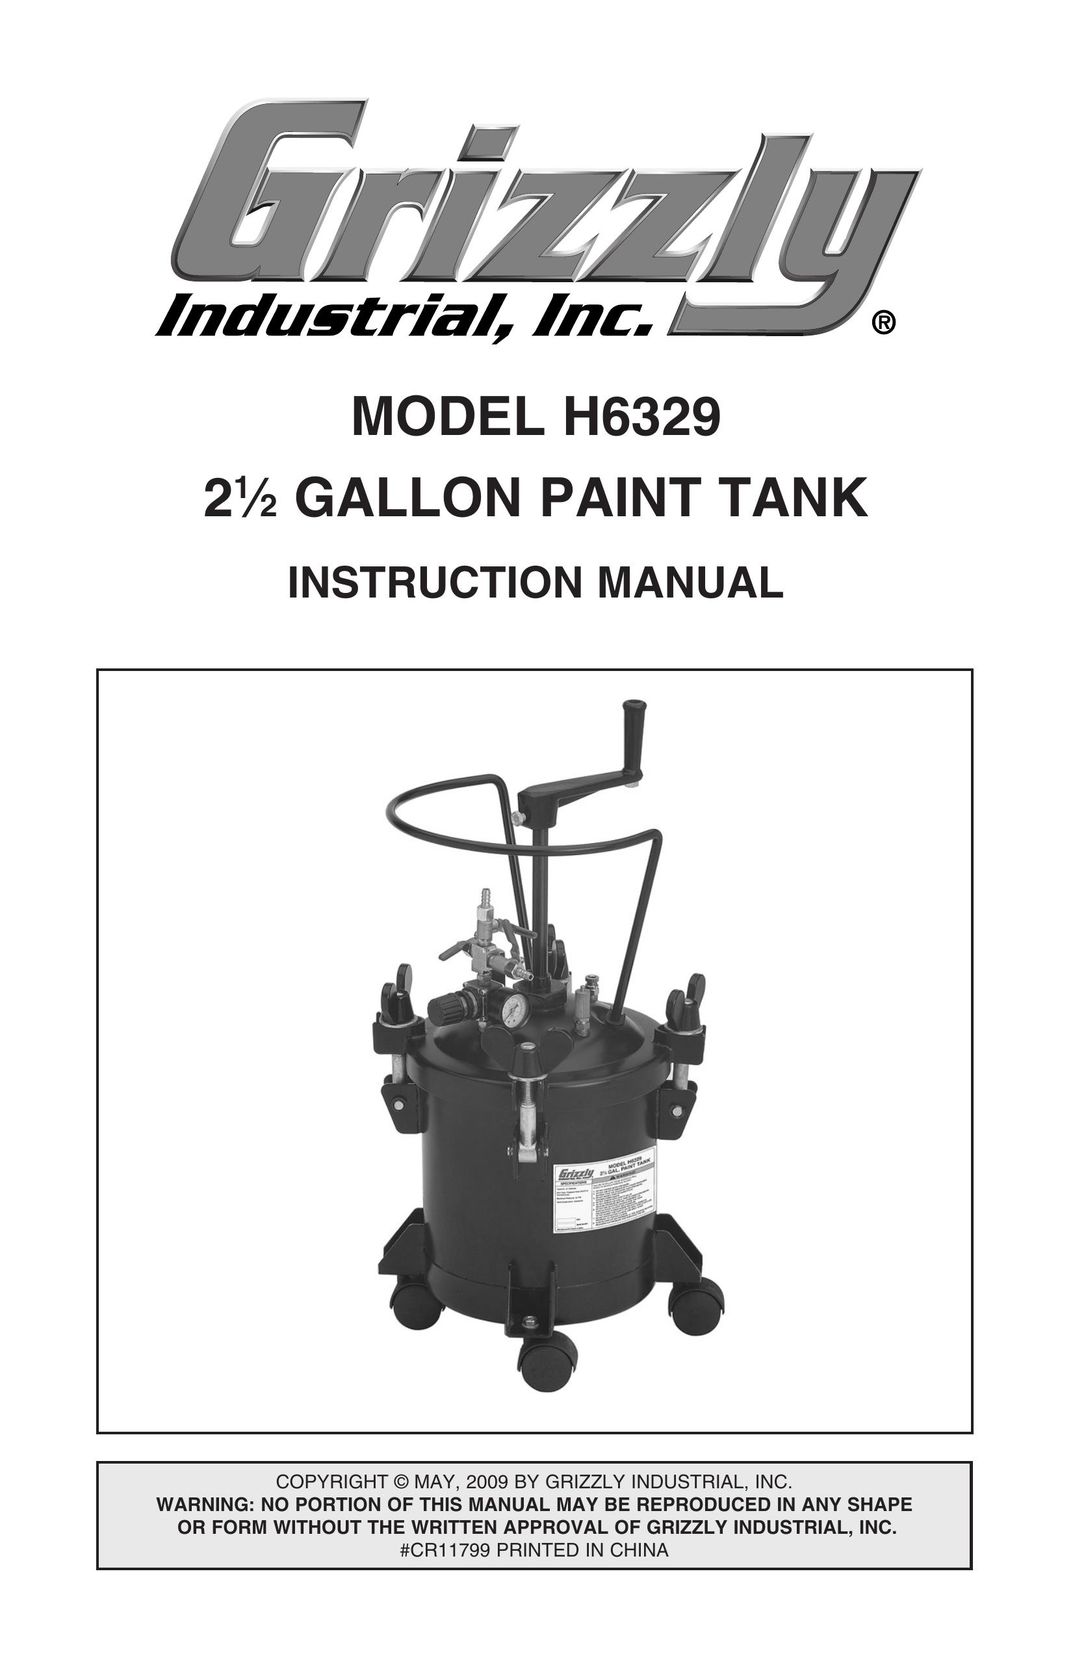 Grizzly H6329 Paint Sprayer User Manual